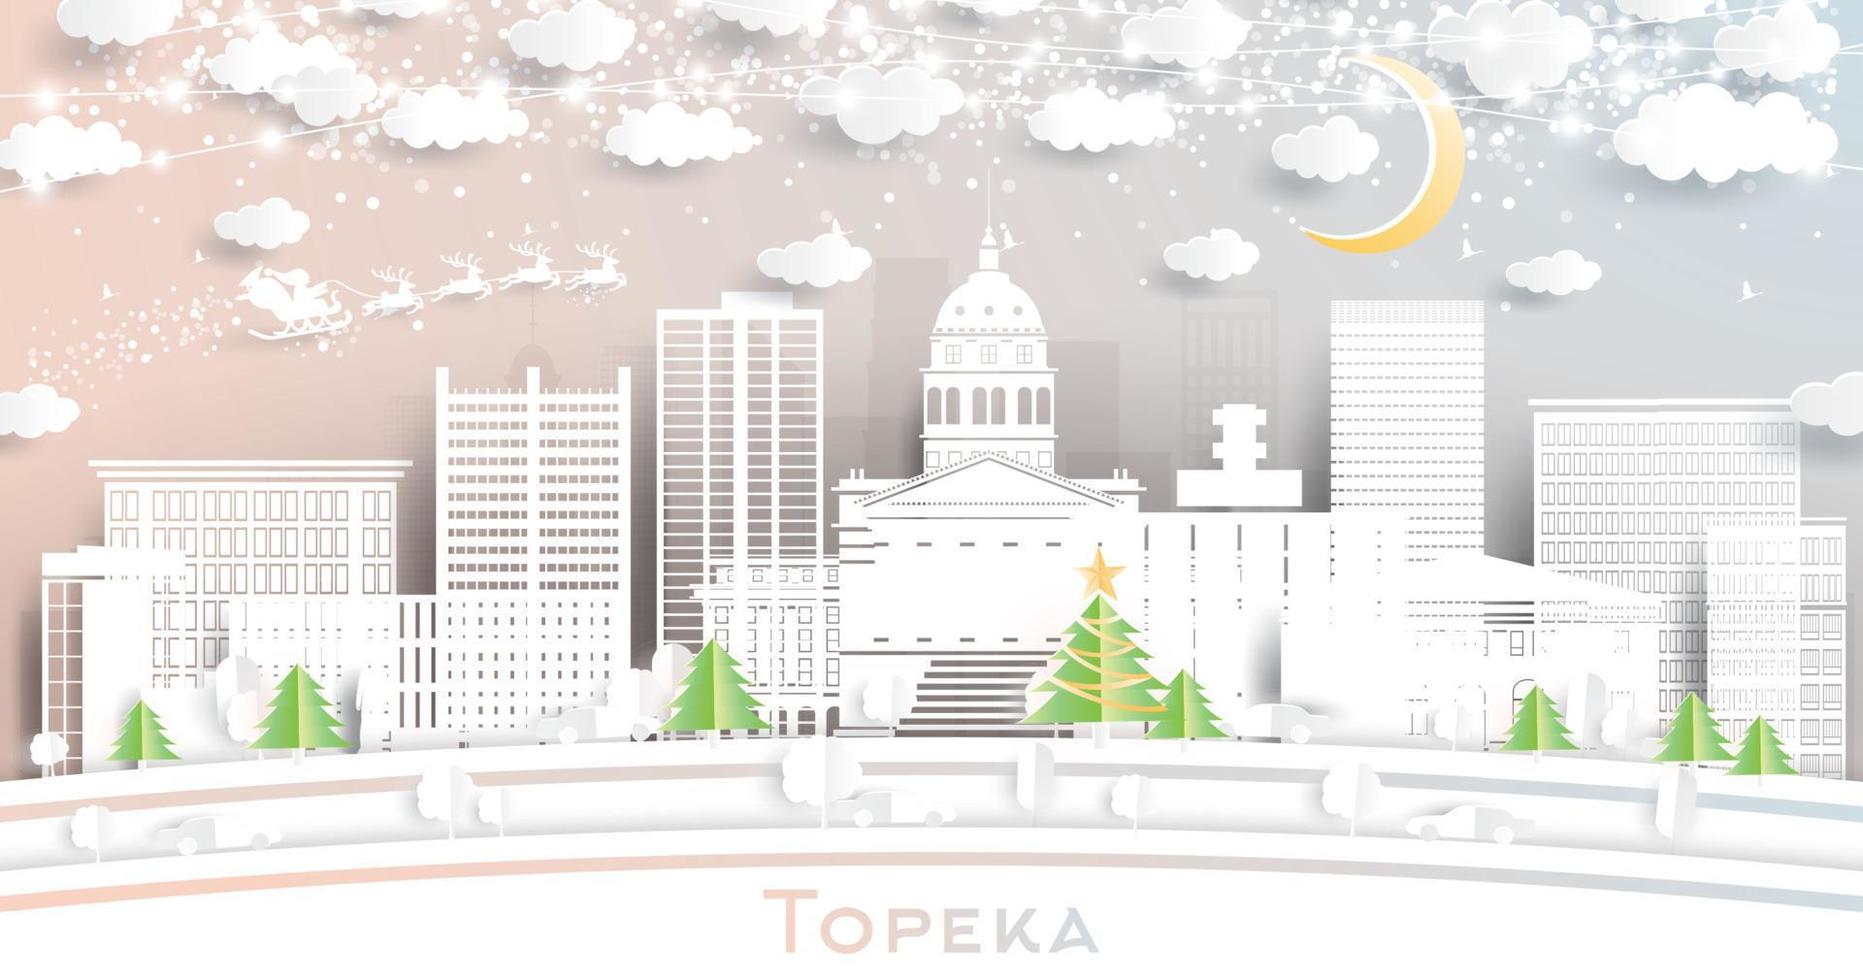 Topeka Kansas USA City Skyline in Paper Cut Style with Snowflakes, Moon and Neon Garland. vector